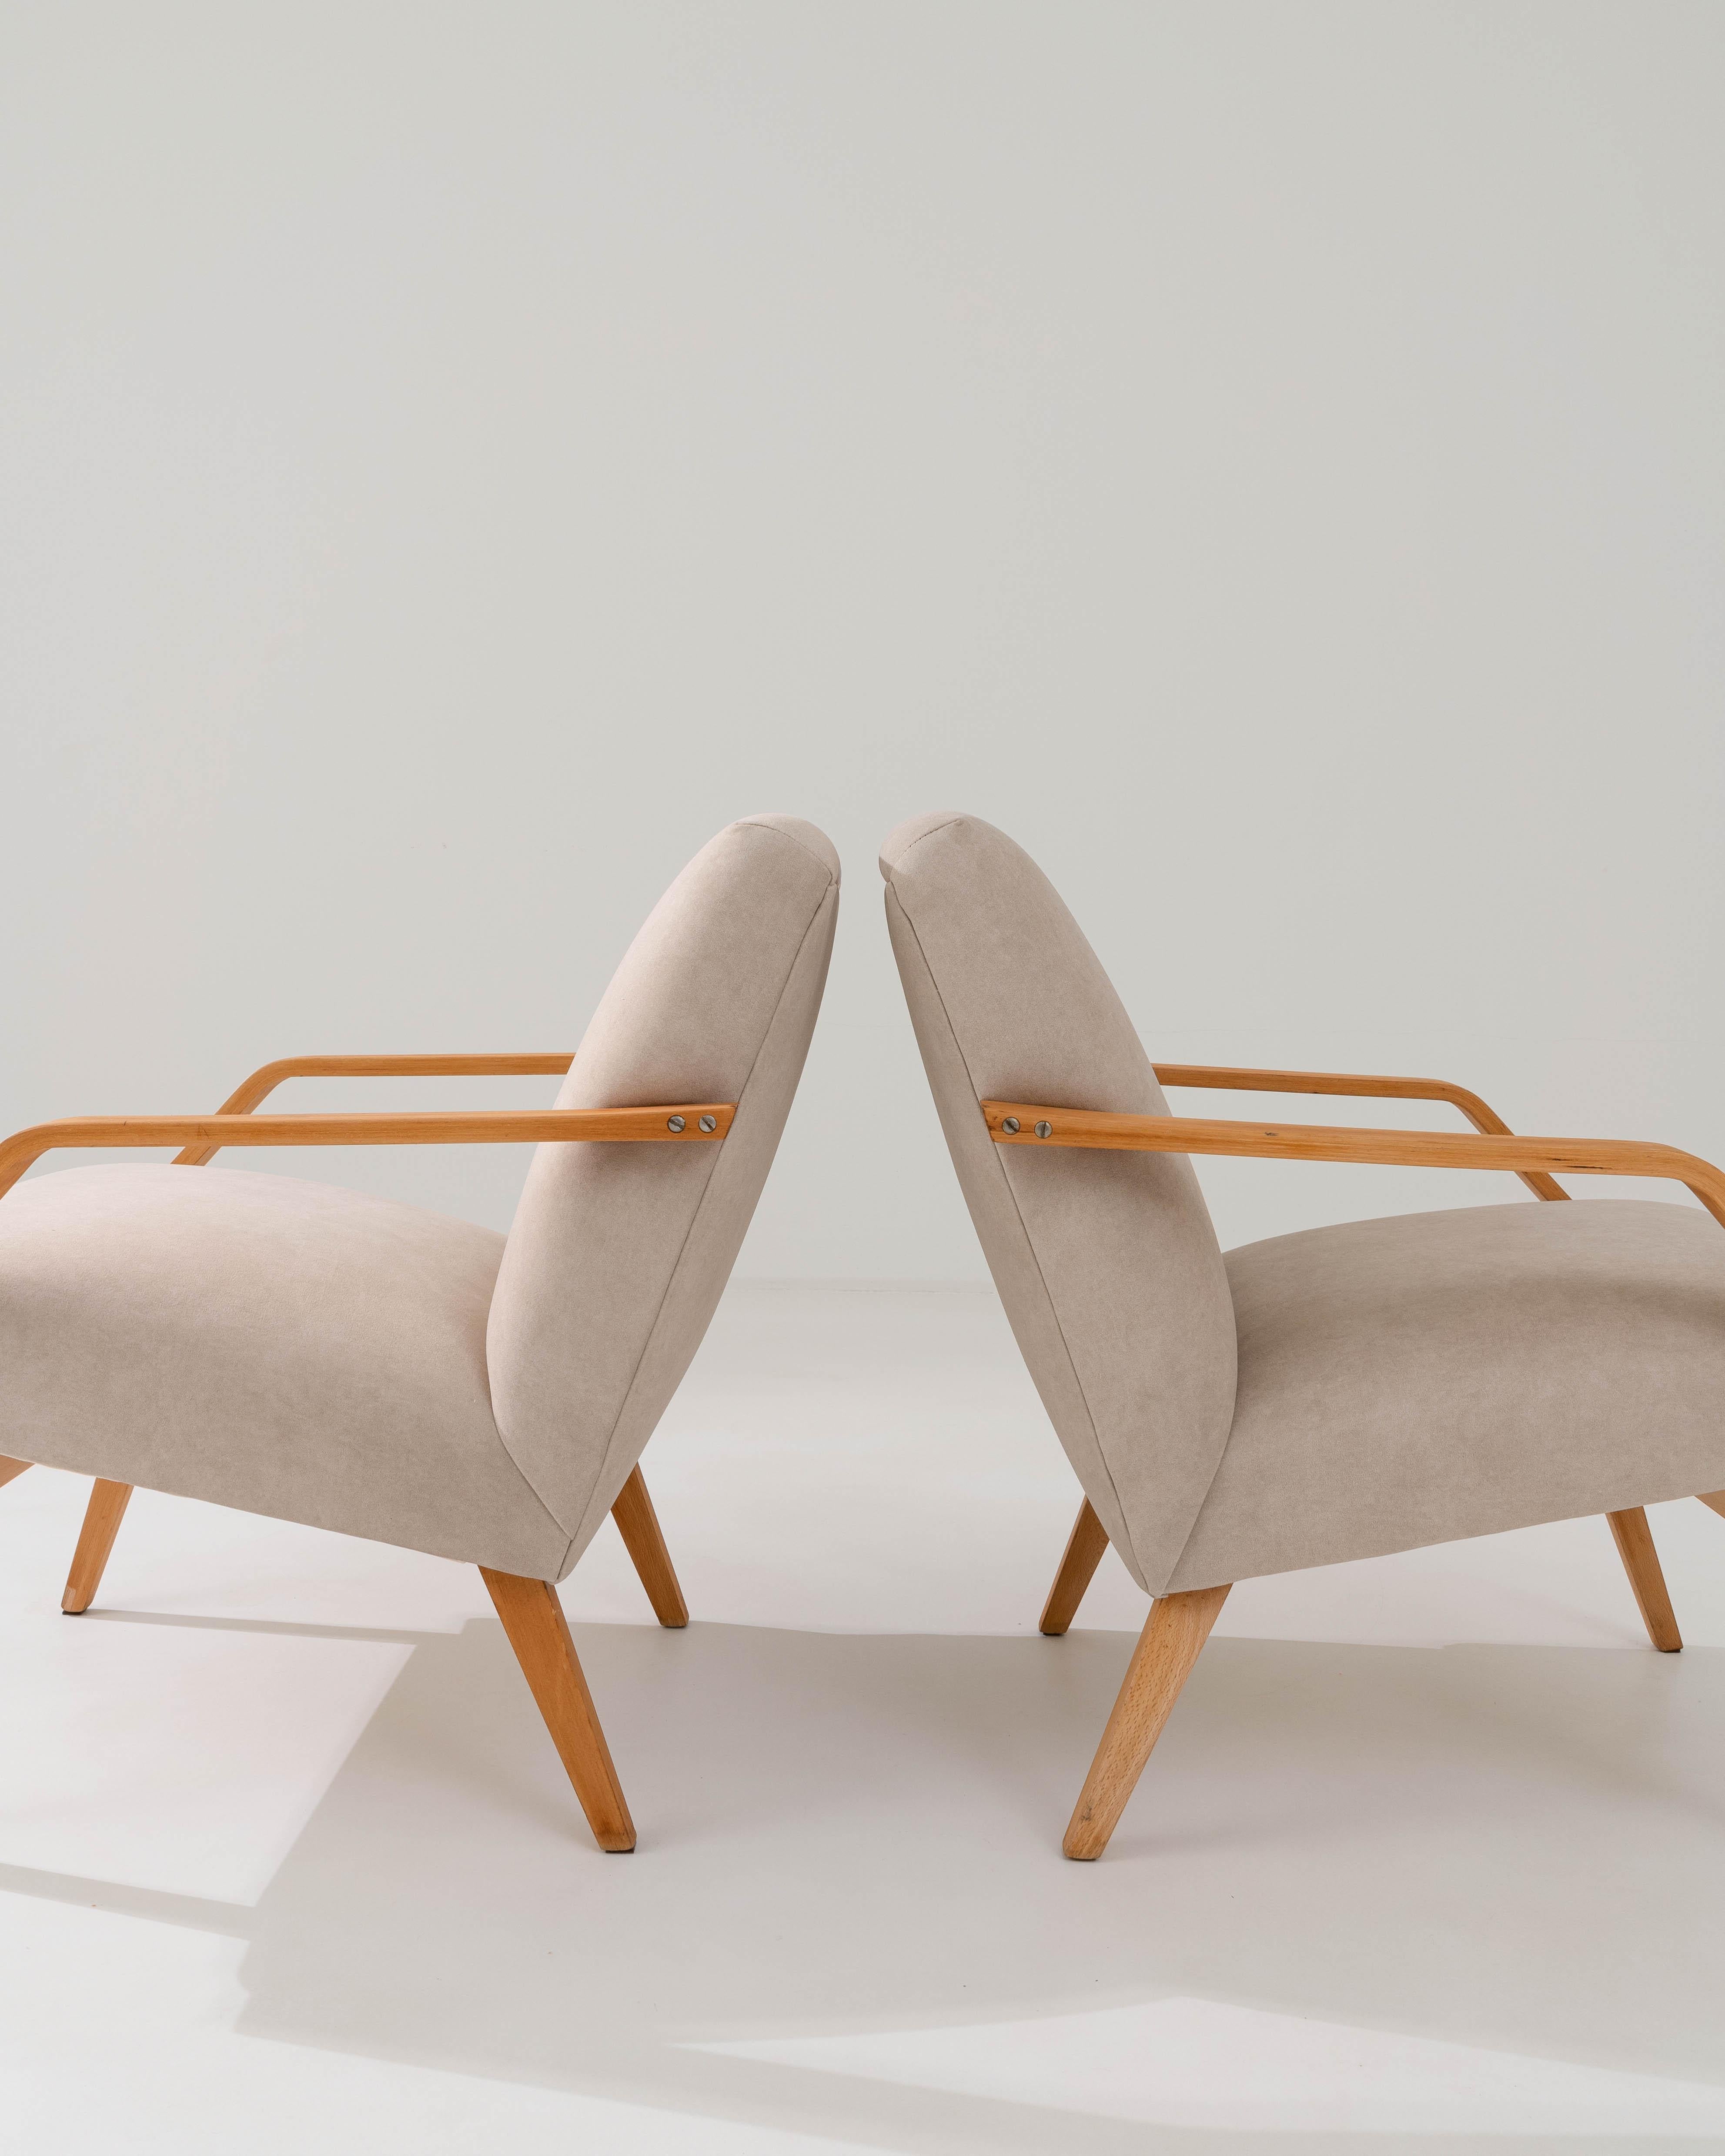 Mid-20th Century 1960s Czech Upholstered Armchairs, a Pair For Sale